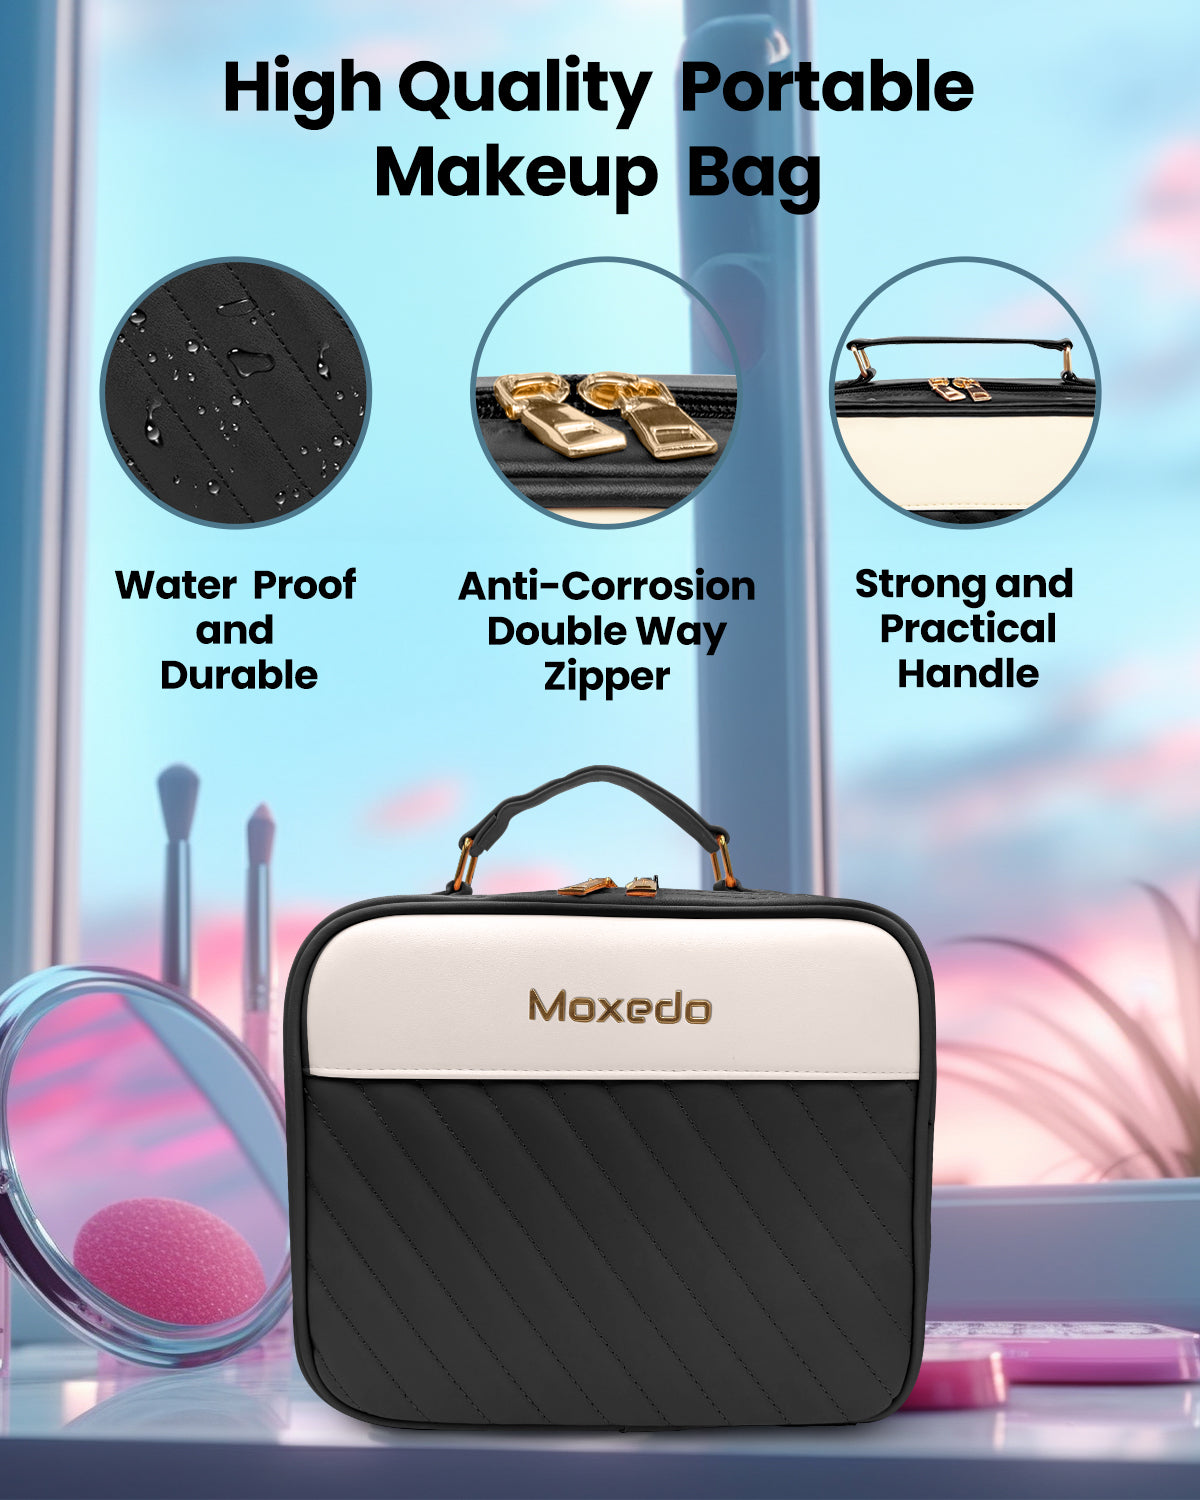 Moxedo 2 in 1 Portable Make-up Bag with Built-in LED Lighting Mirror (Black)